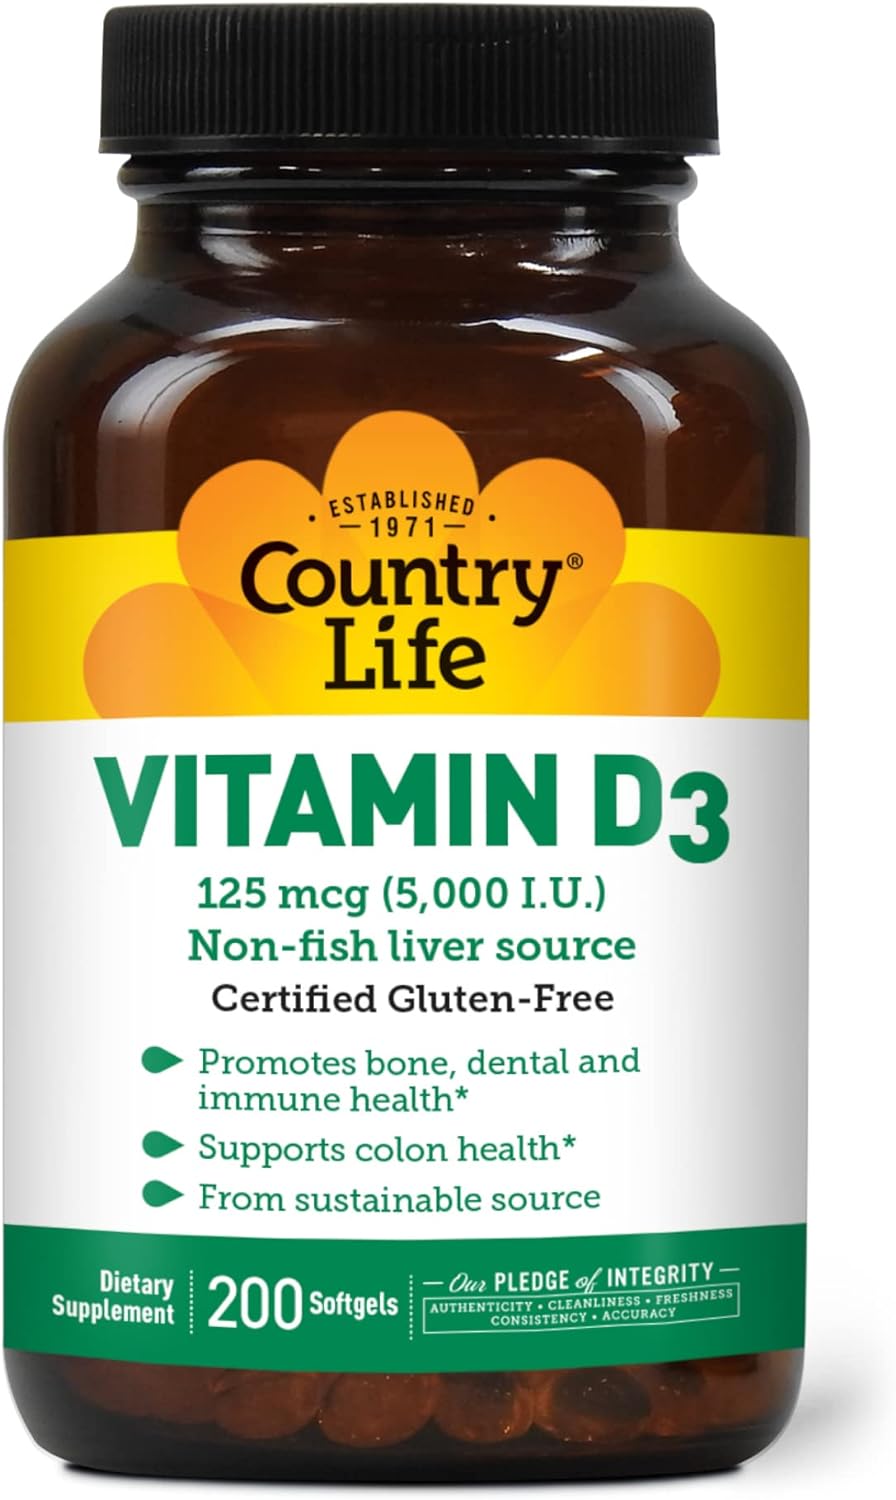 Country Life, Vitamin D3 5000 IU, Supports Healthy Bones, Teeth and Immune System, Daily Supplement, 200 ct